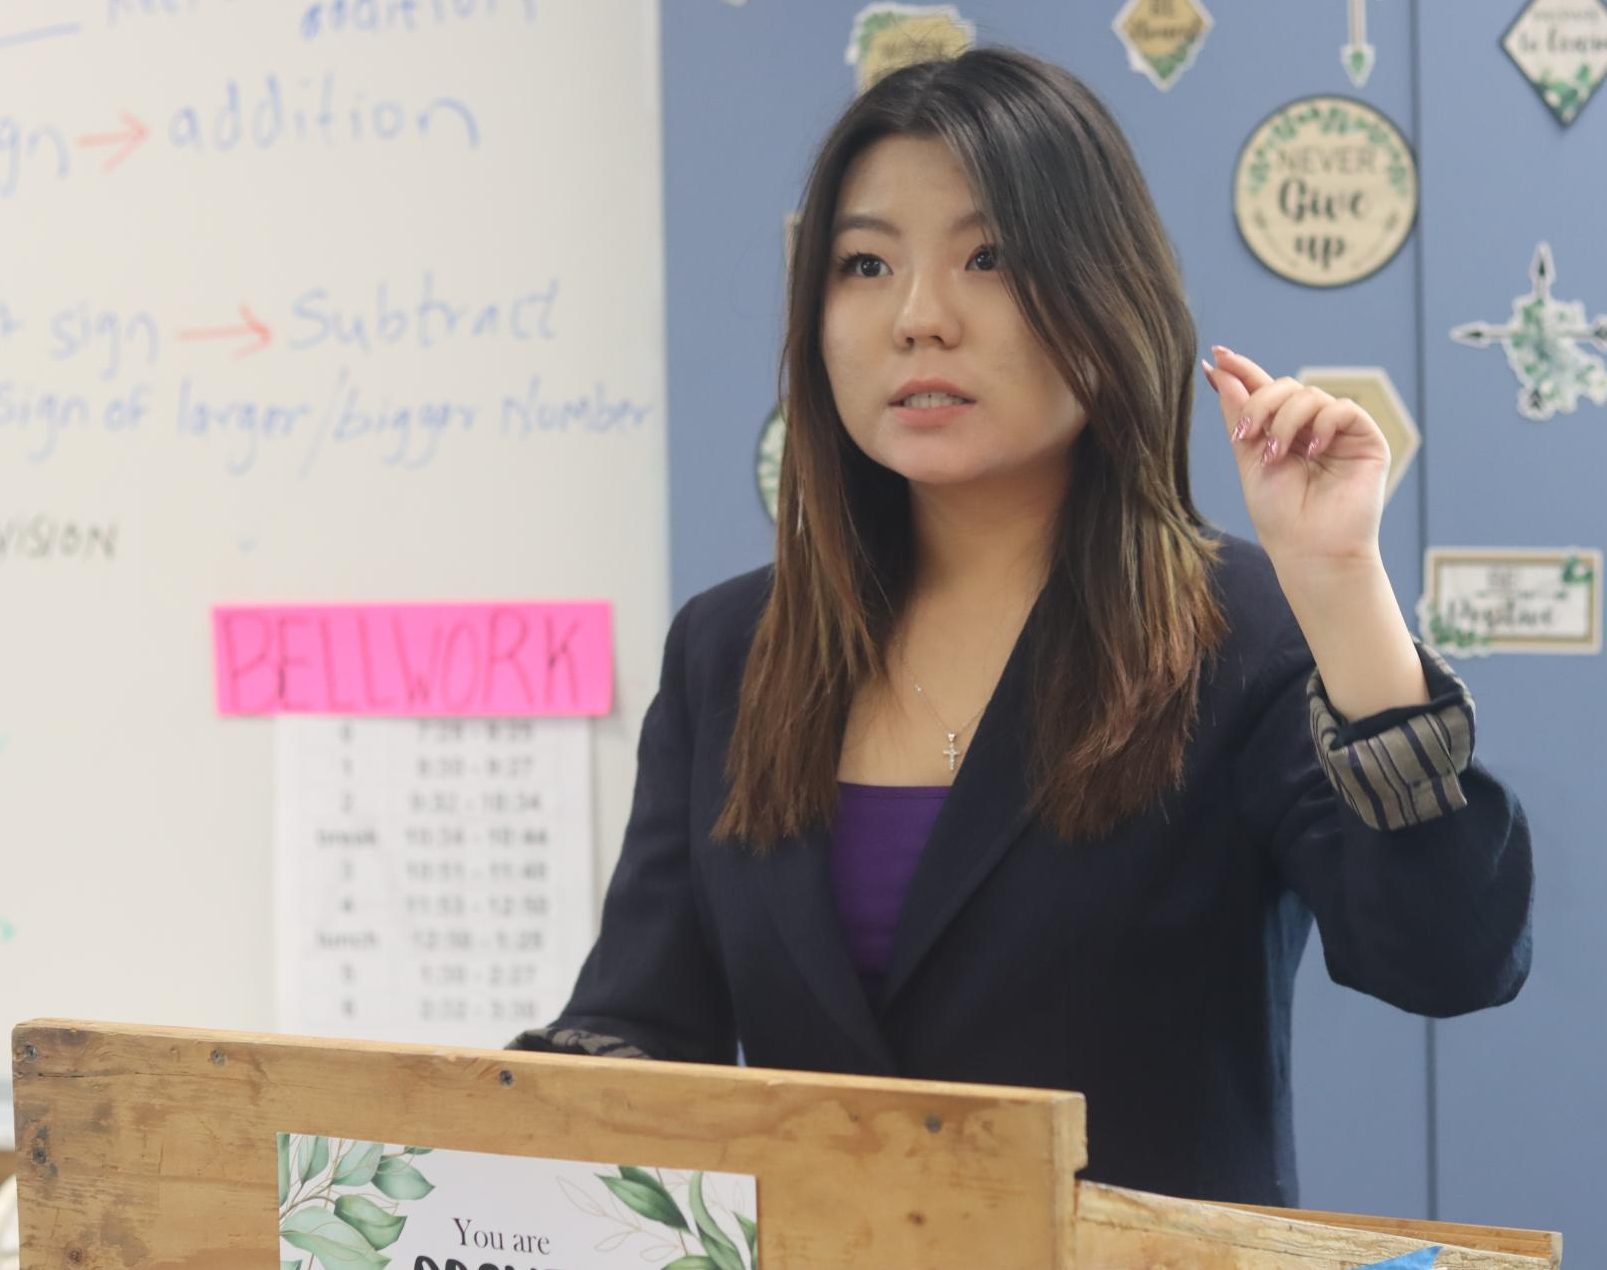 Audrey Bae delivers the “one” speech and affirmed the motion, “This House would establish a permanent host city for the Winter Olympics and a permanent host city for the Summer Olympics.”